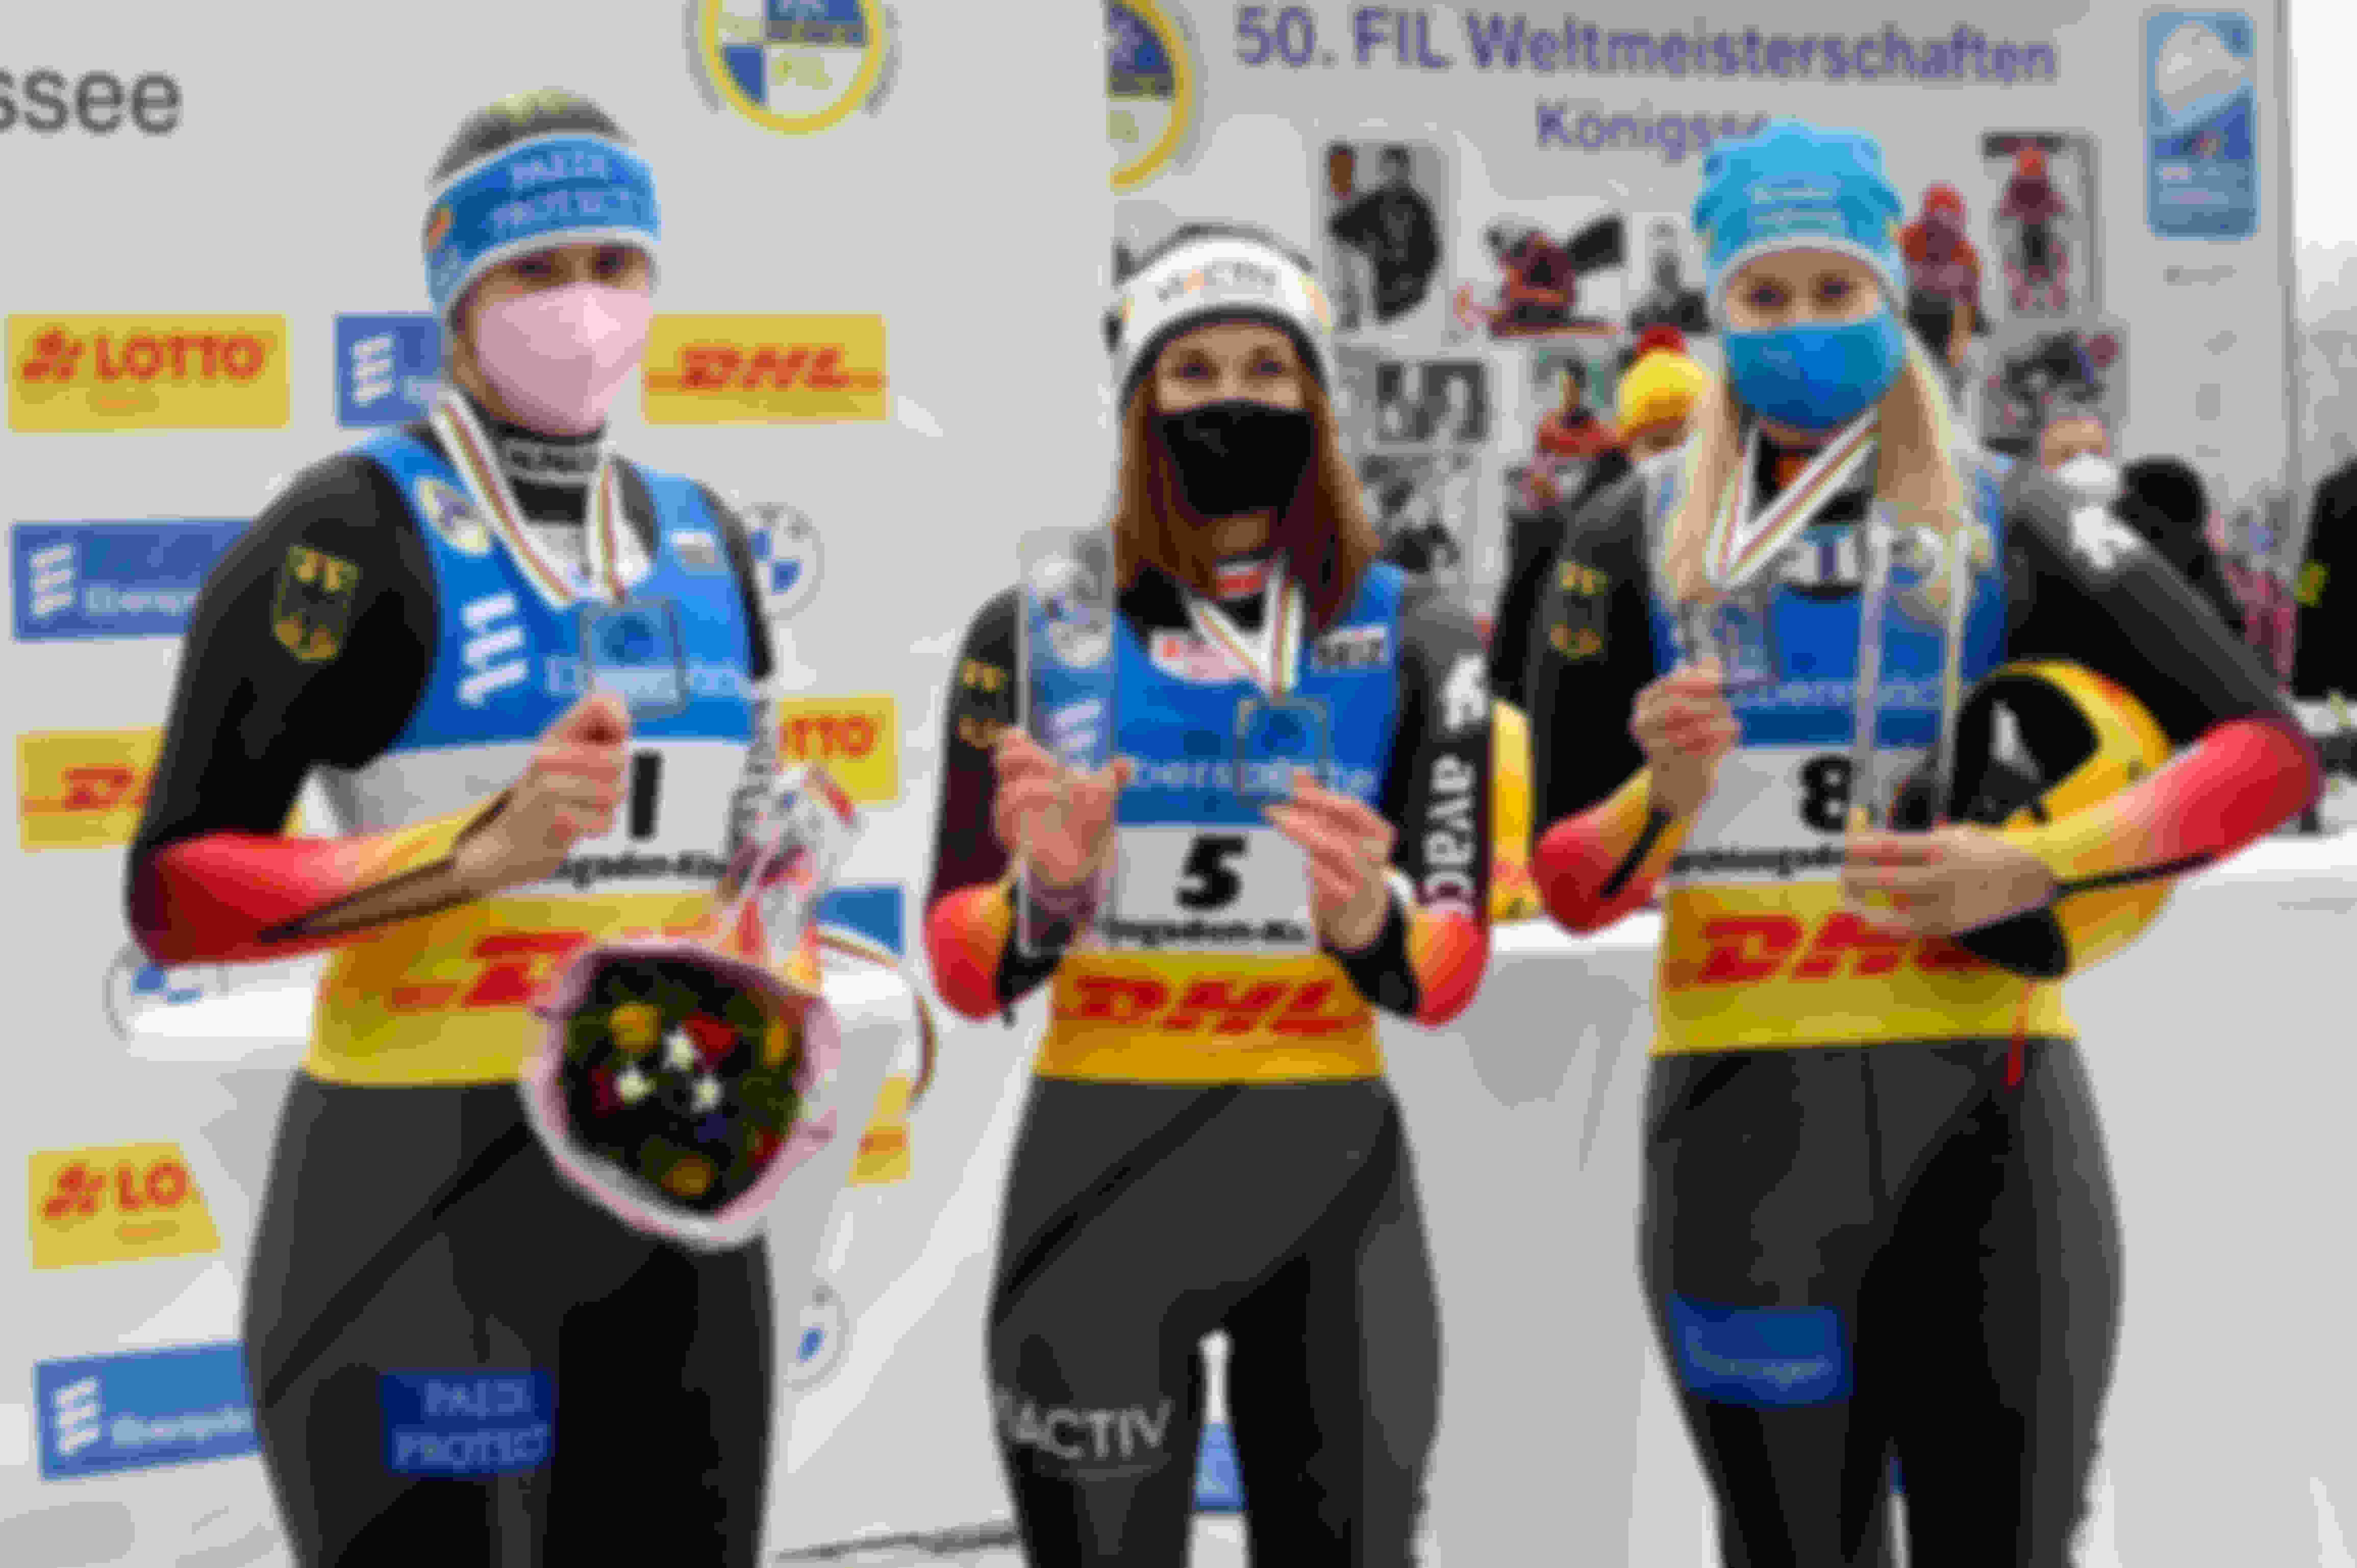 Natalie Geisenberger (Silver), Julia Taubitz (Gold) and Dajana Eitberger (bronze) of Germany celebrate after the Women's Singles event at the 2021 Luge World Championships in Koenigssee, Germany.